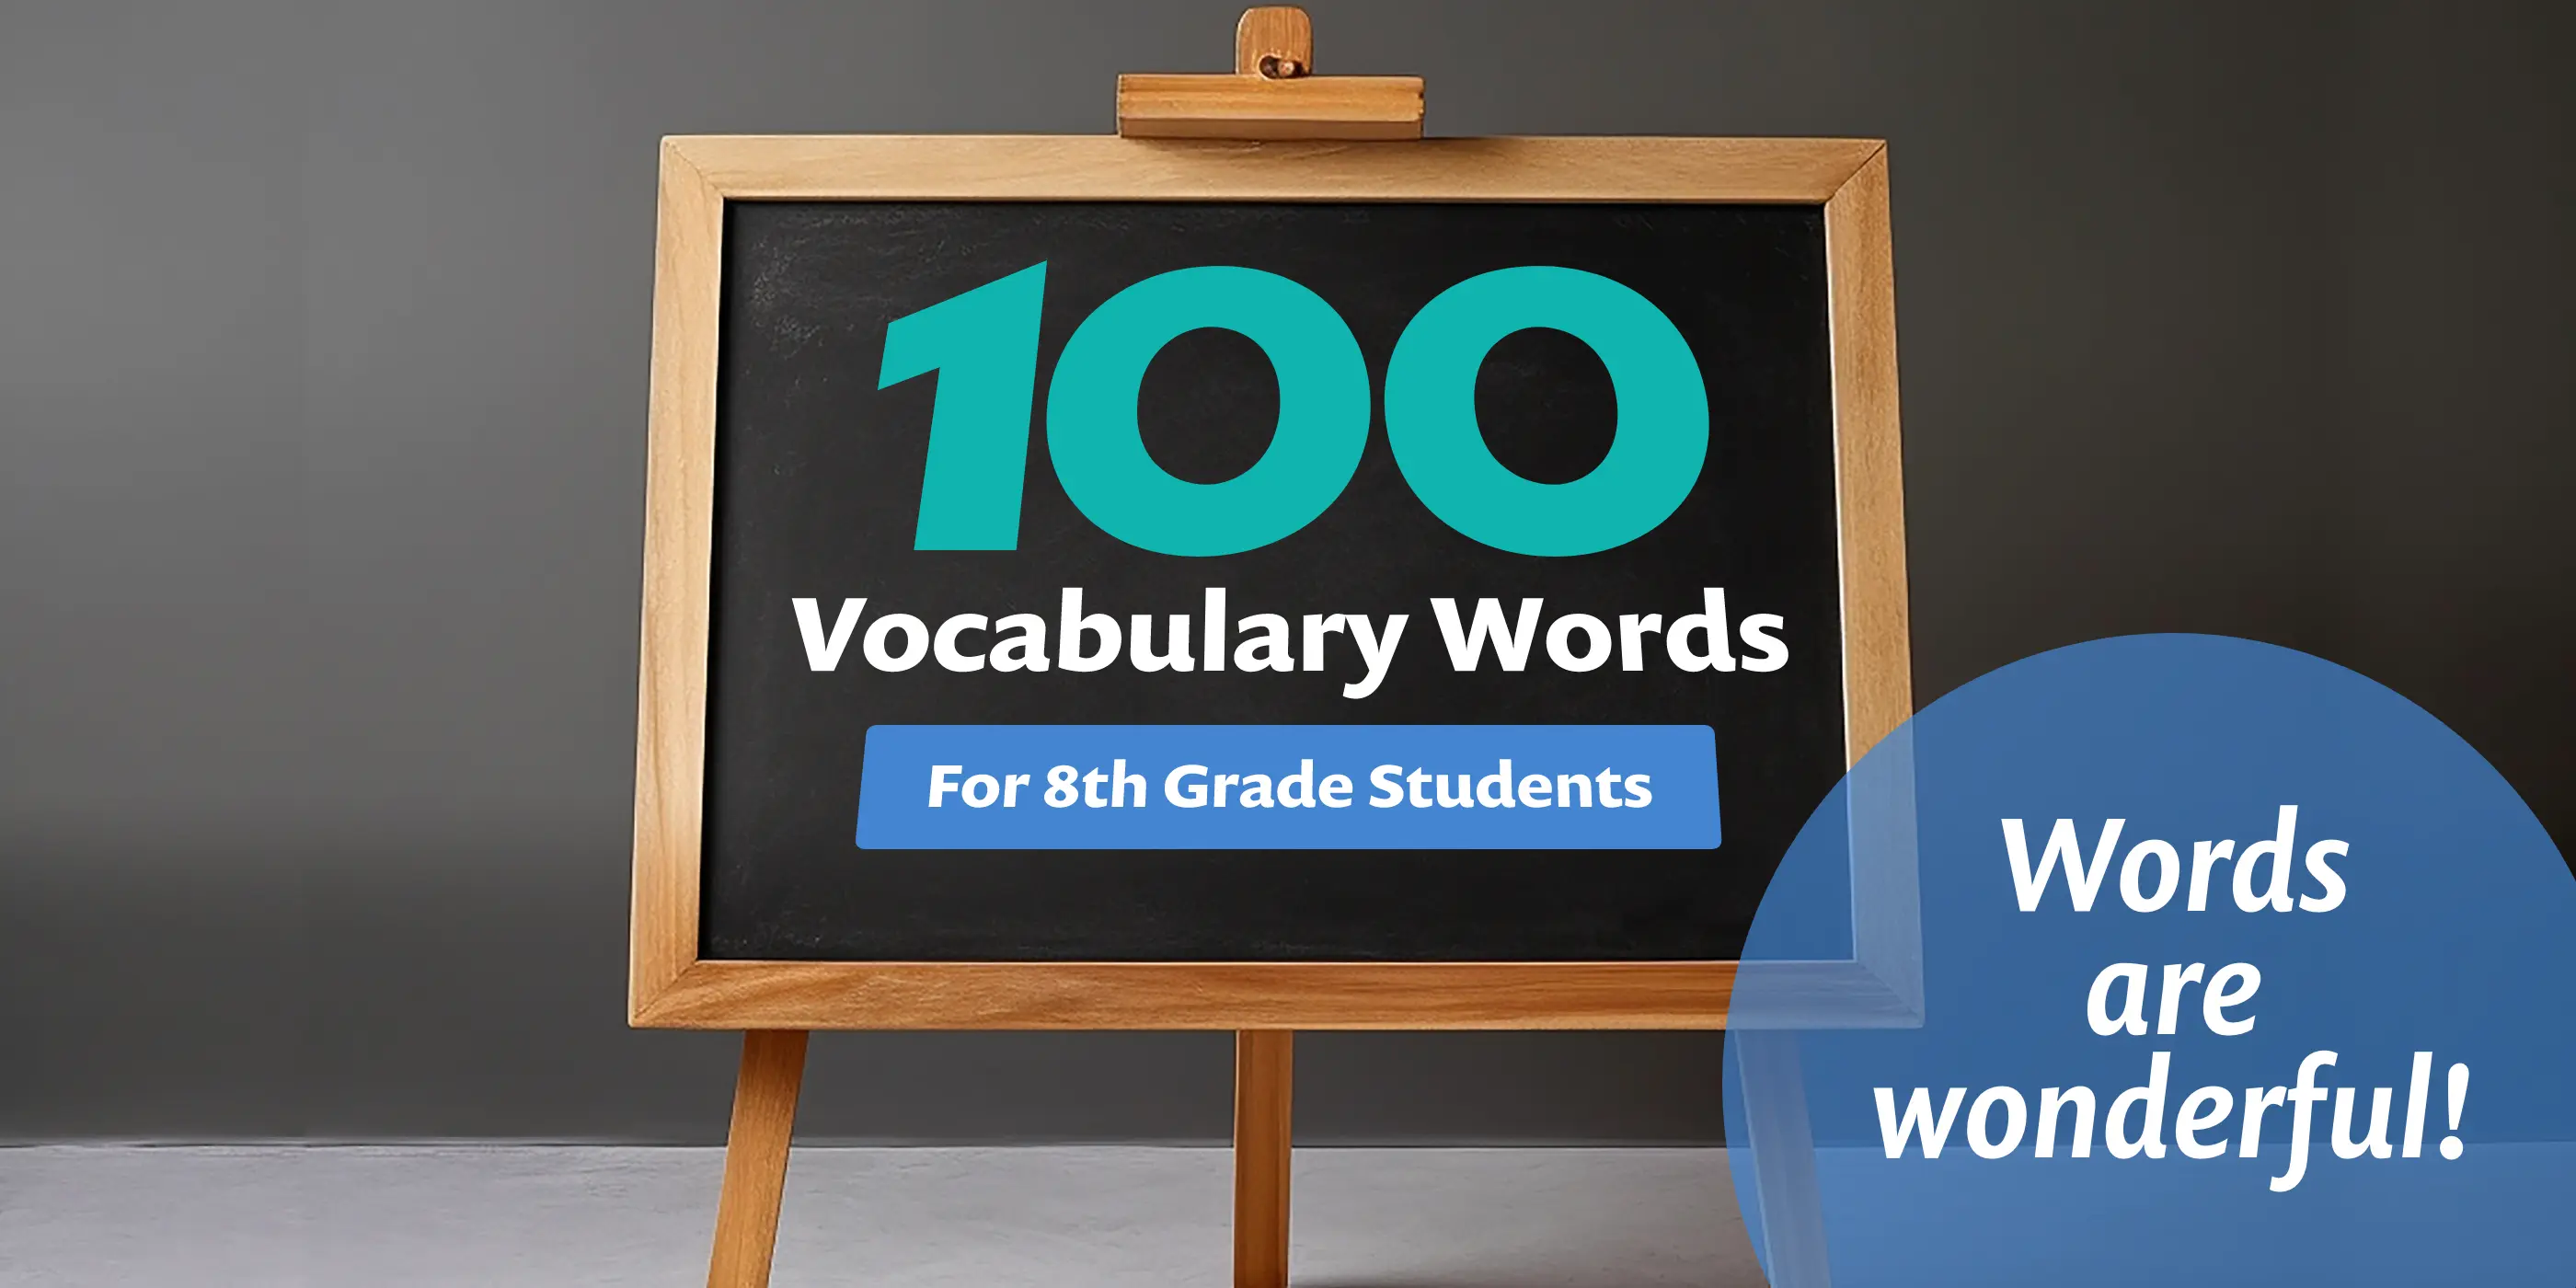 100 Vocabulary Words for 8th Grade Students